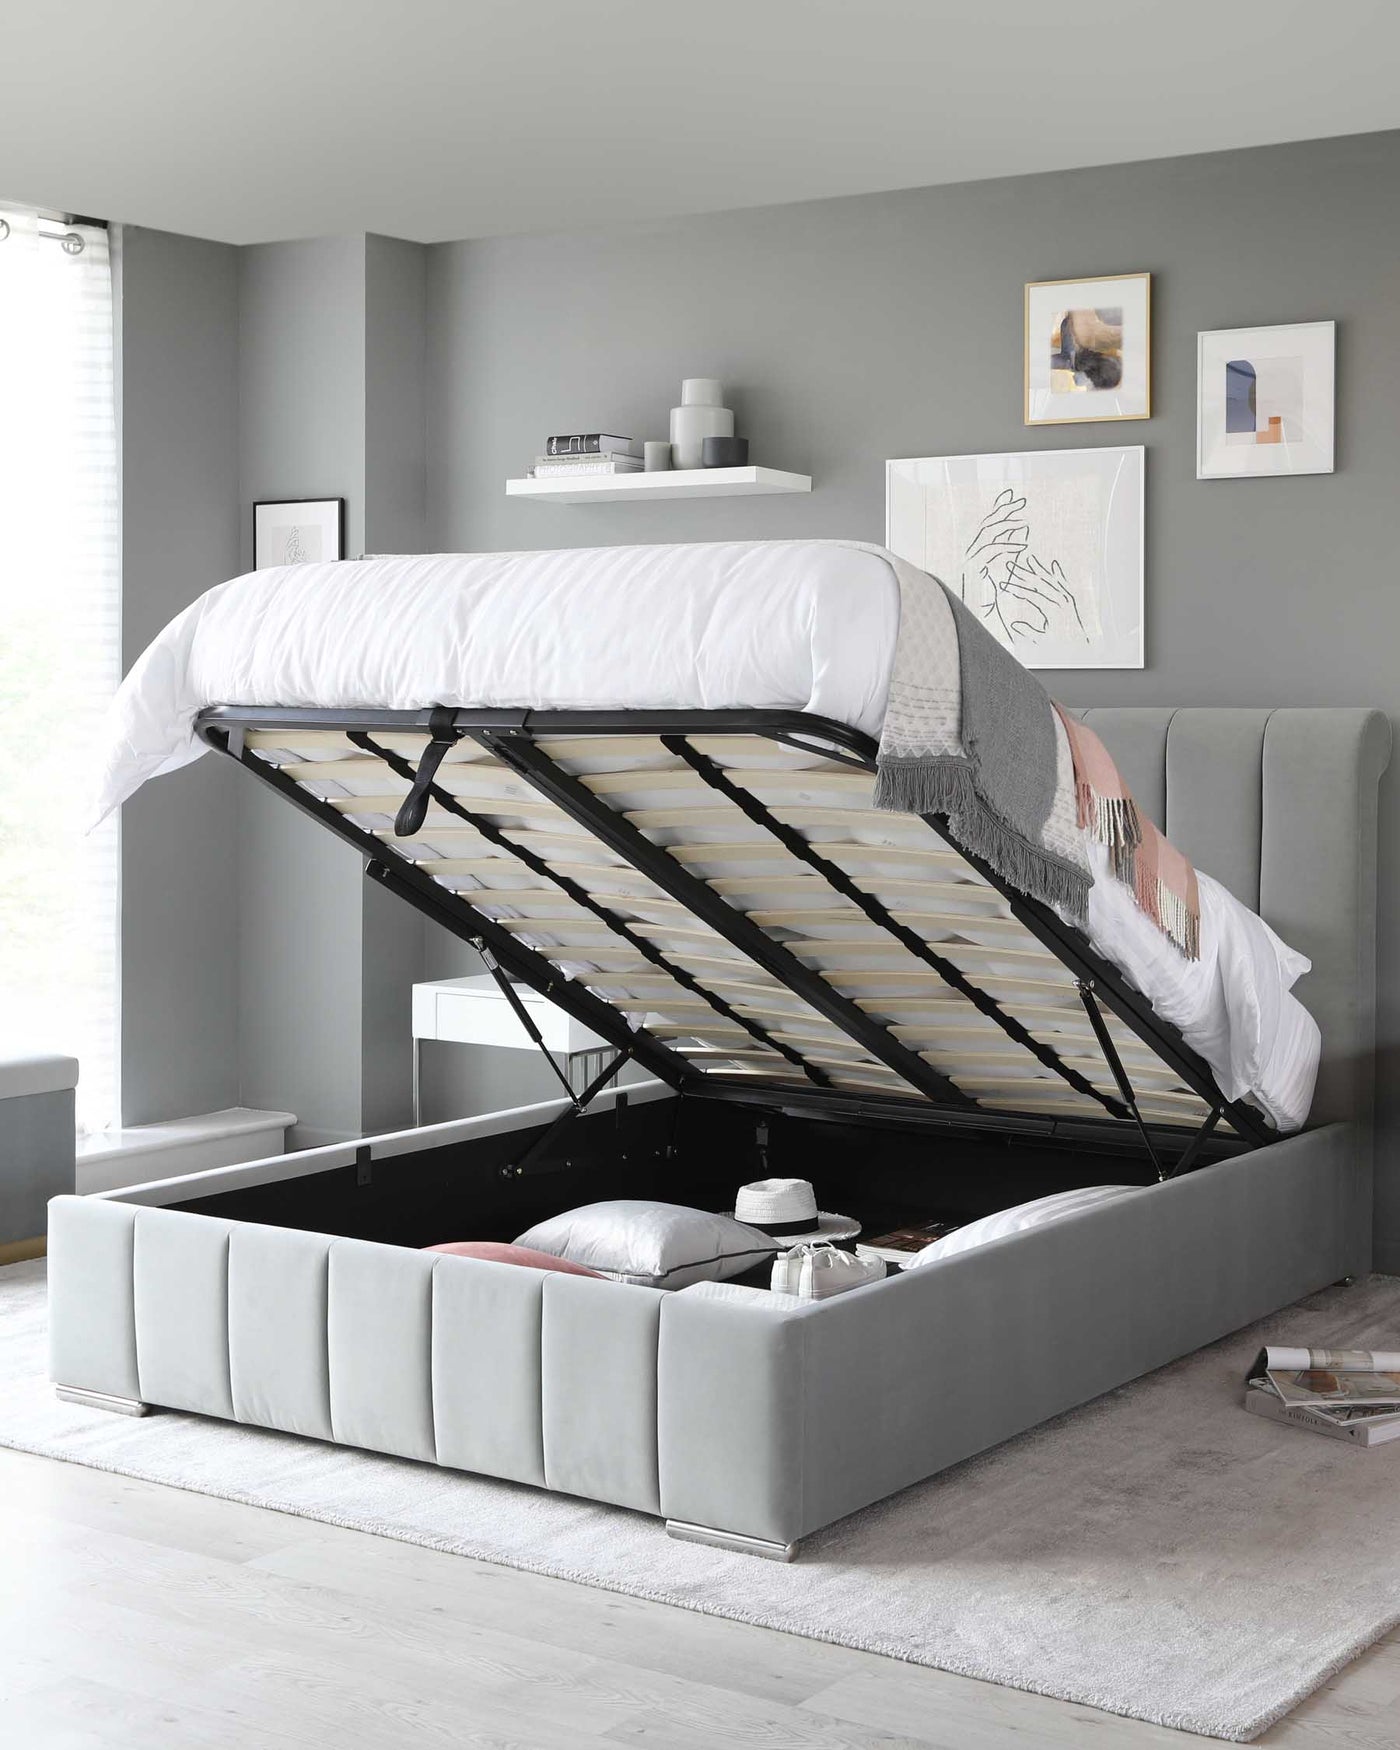 Contemporary light grey upholstered storage bed with a lifted mattress platform revealing a spacious under-bed storage area, featuring a panelled headboard design and positioned on a white fluffy rug; the bed is dressed with white and grey bedding with a touch of pink, and behind, floating shelves and art pieces contribute to a modern aesthetic.